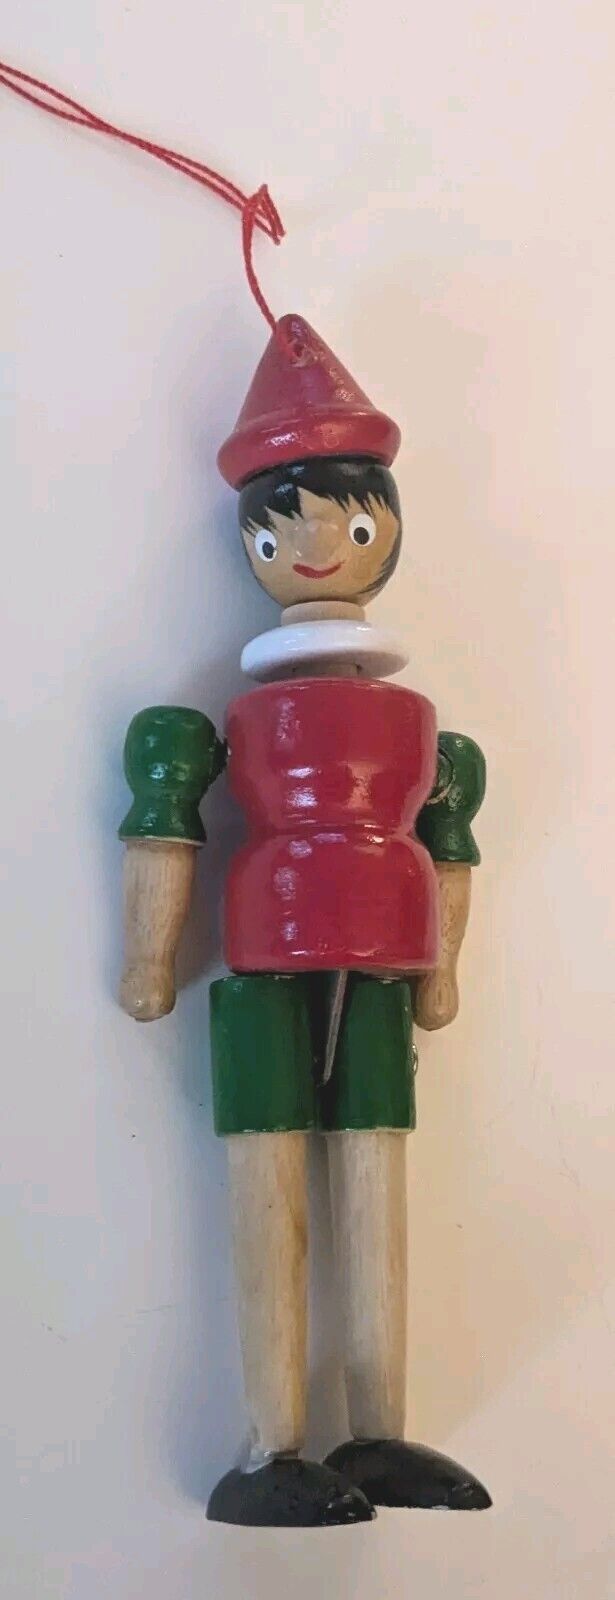 Vtg Pinocchio Christmas Ornament Wooden Jointed 7